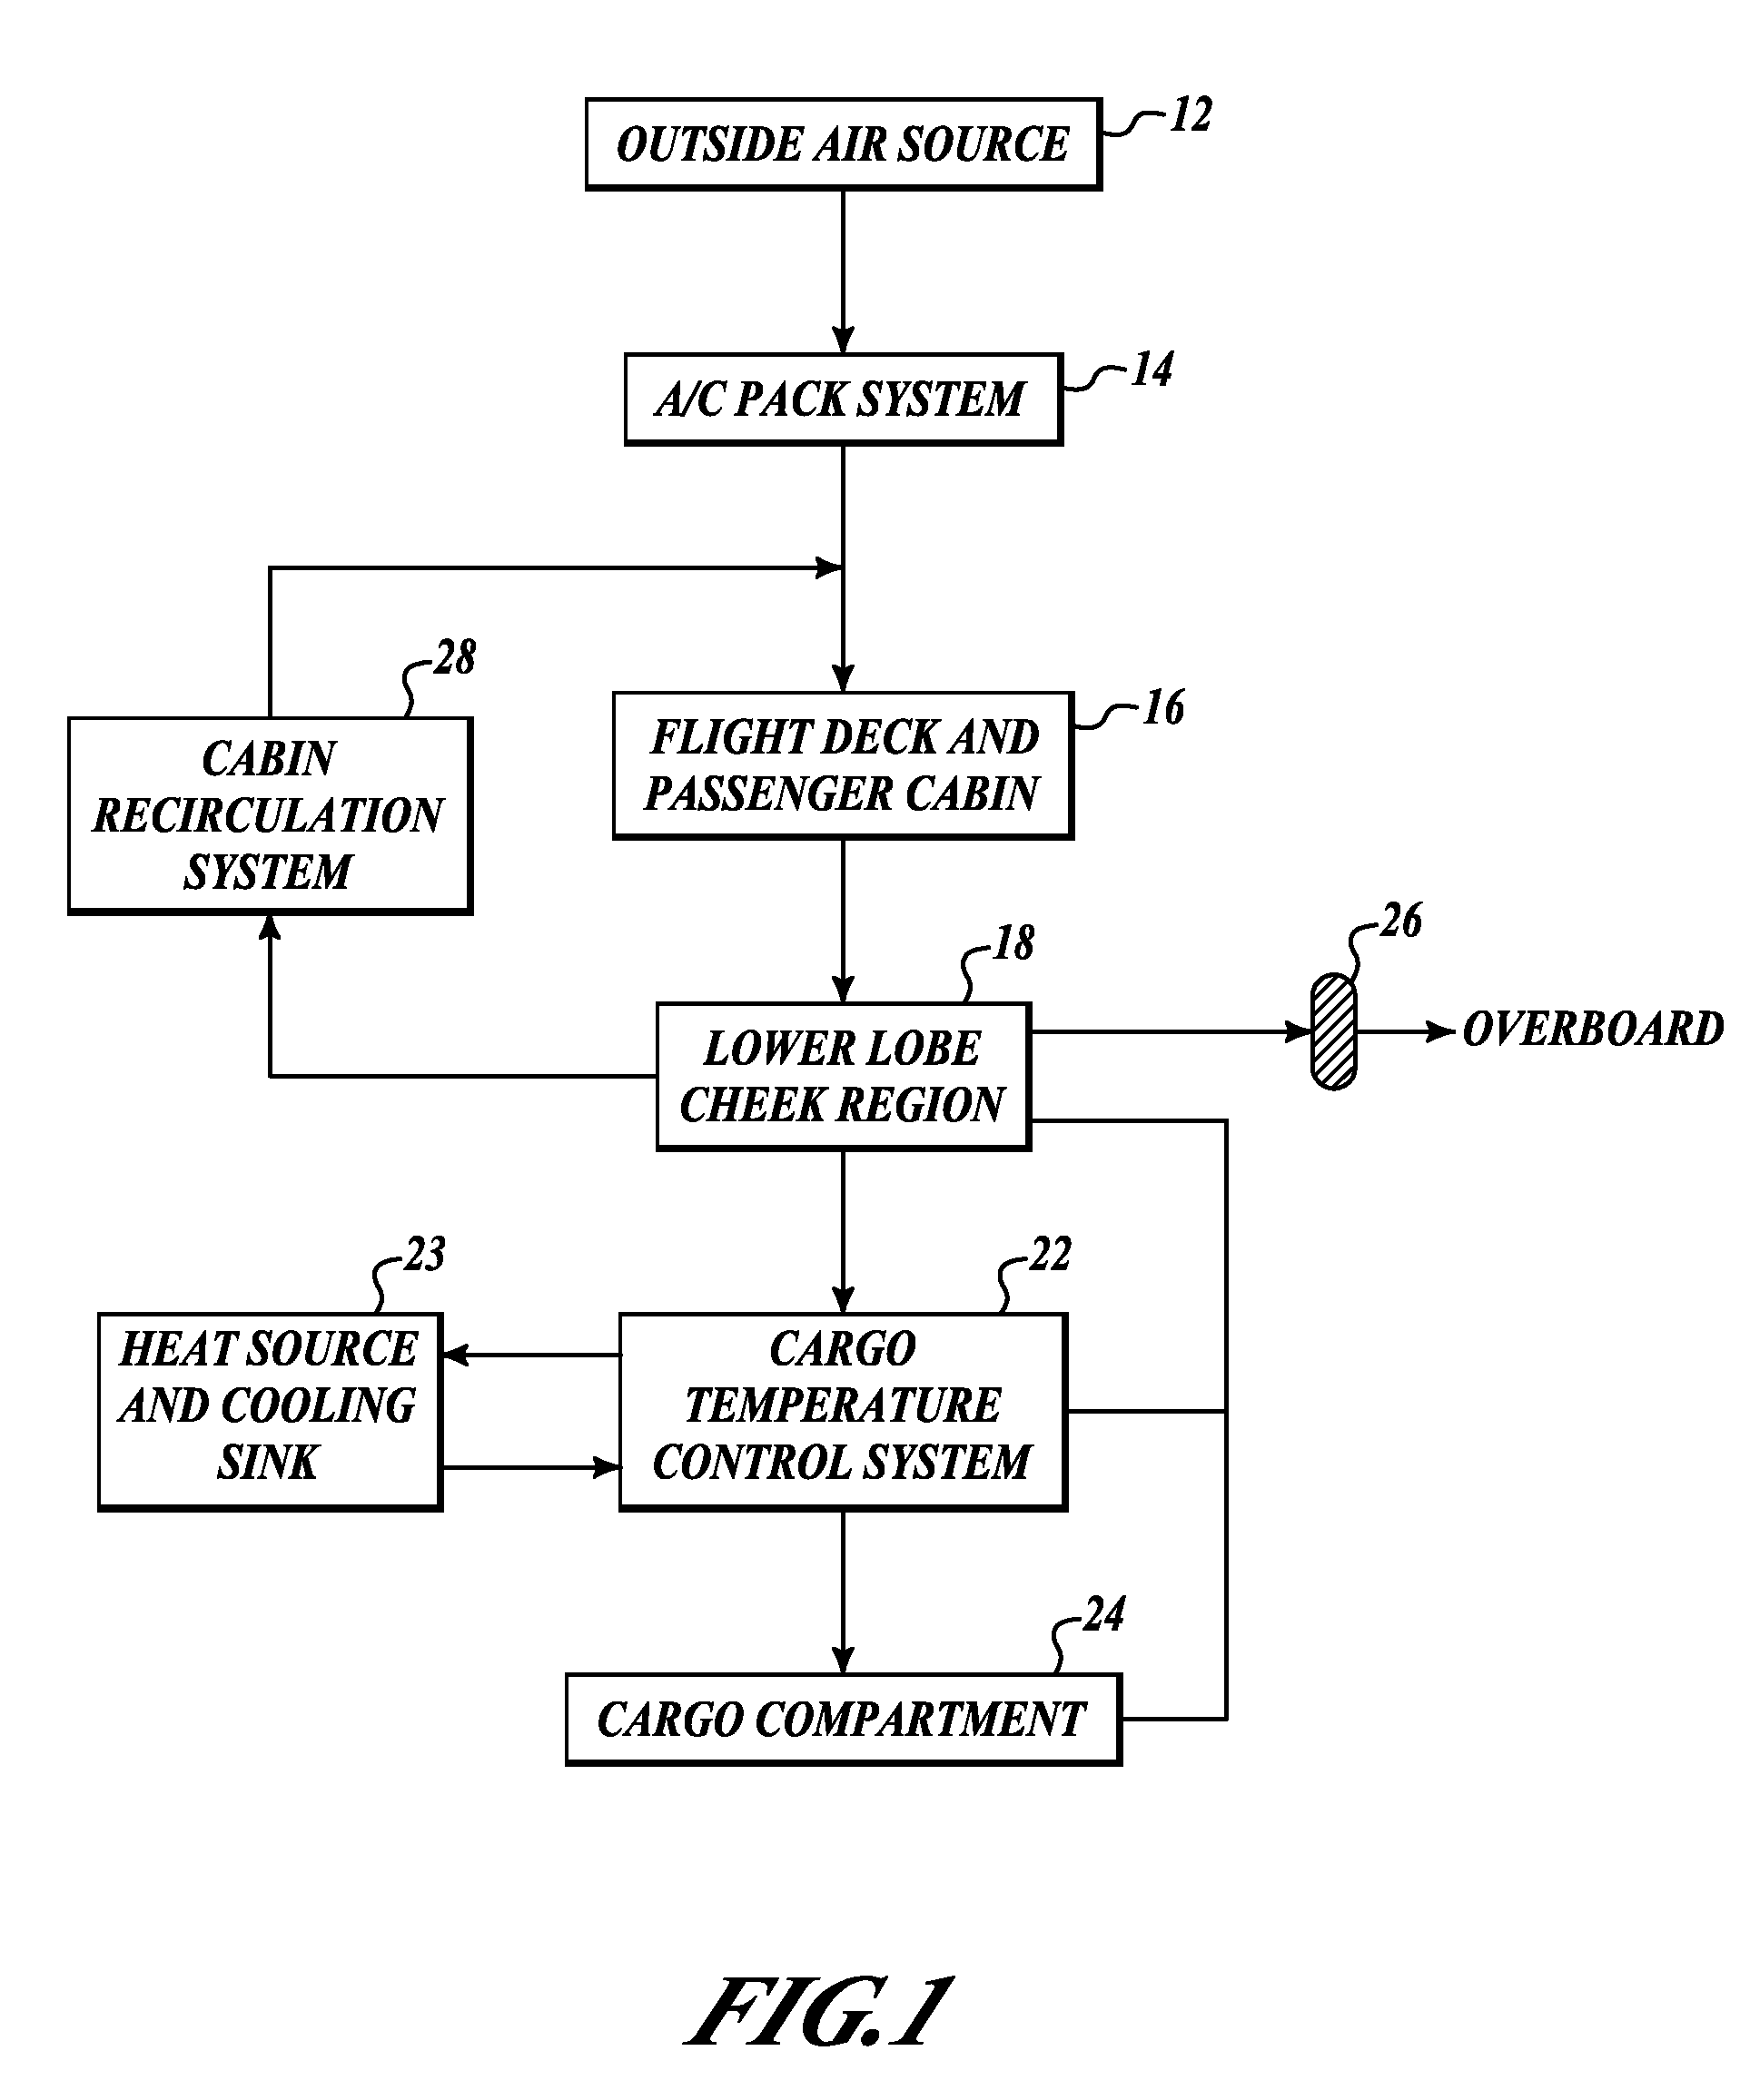 Systems and methods for cargo compartment air conditioning using recirculated air